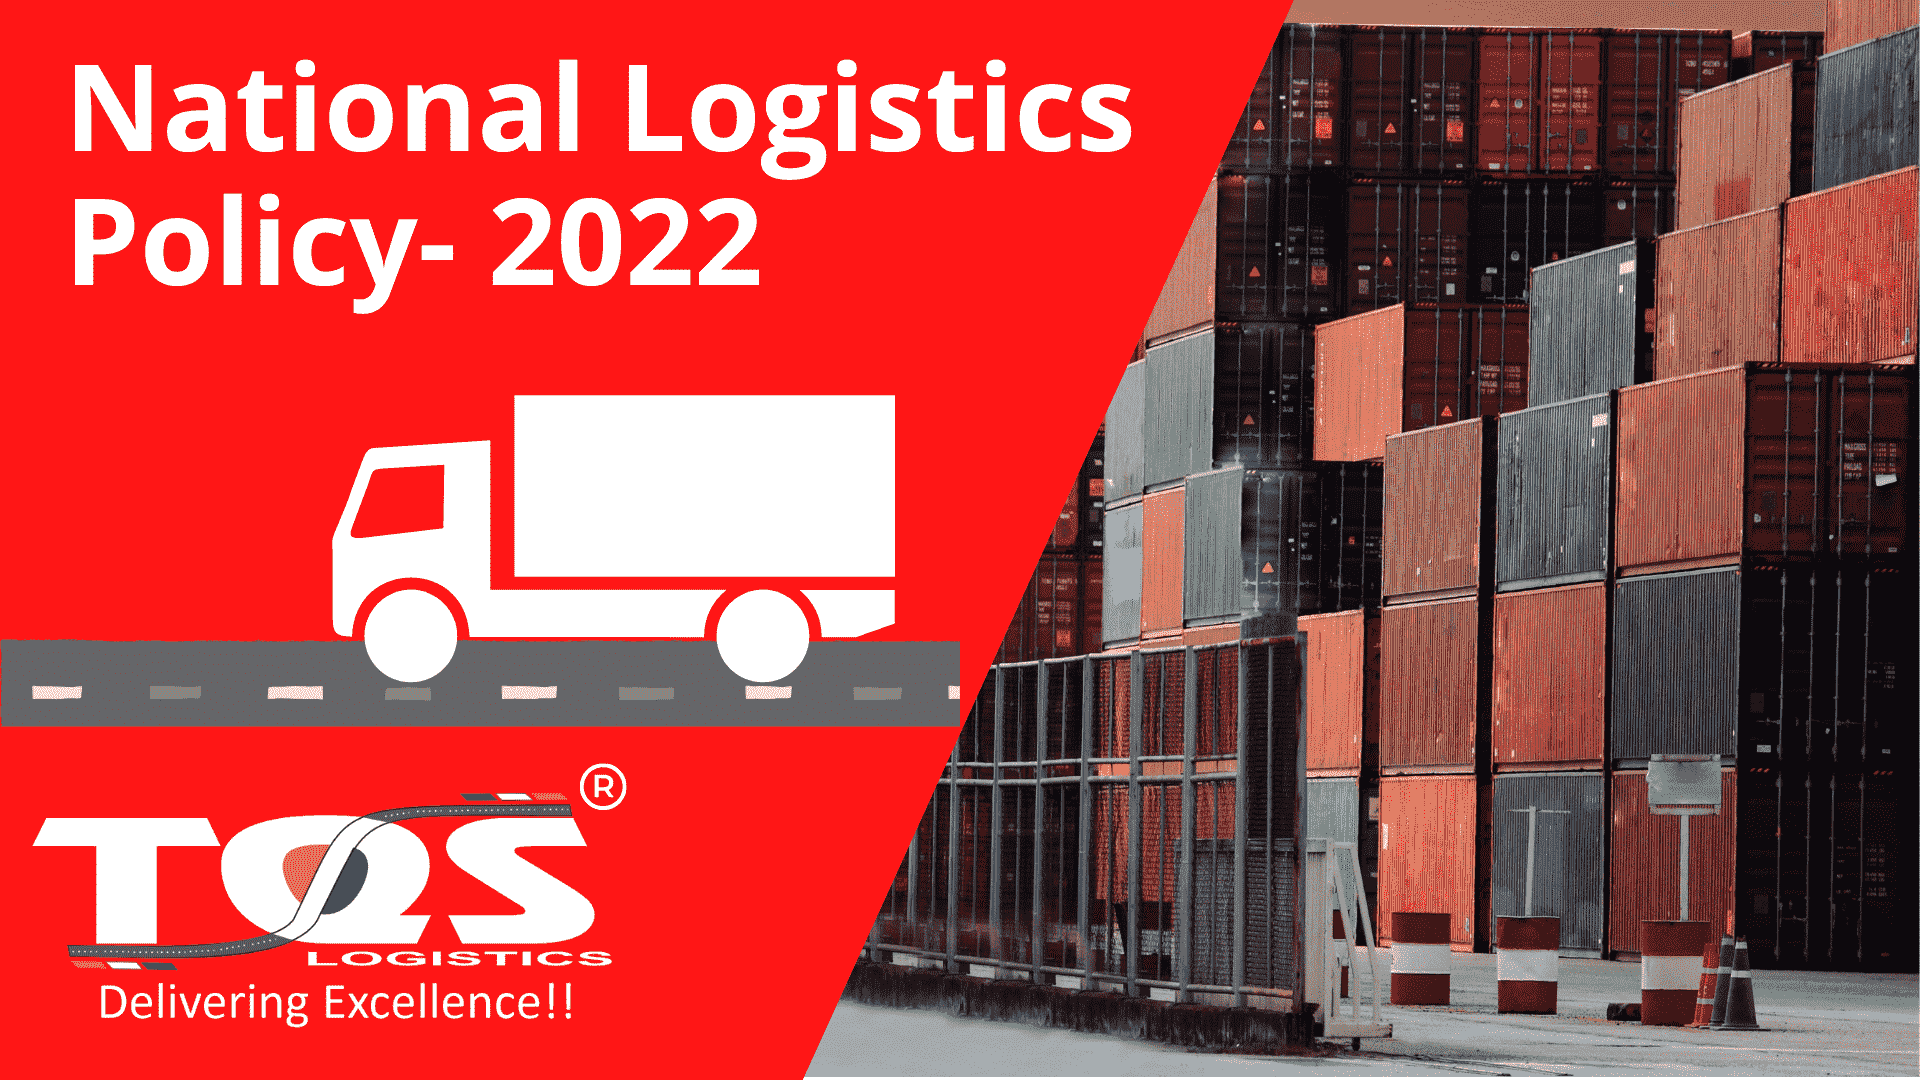 What is New National Logistics Policy 2022?